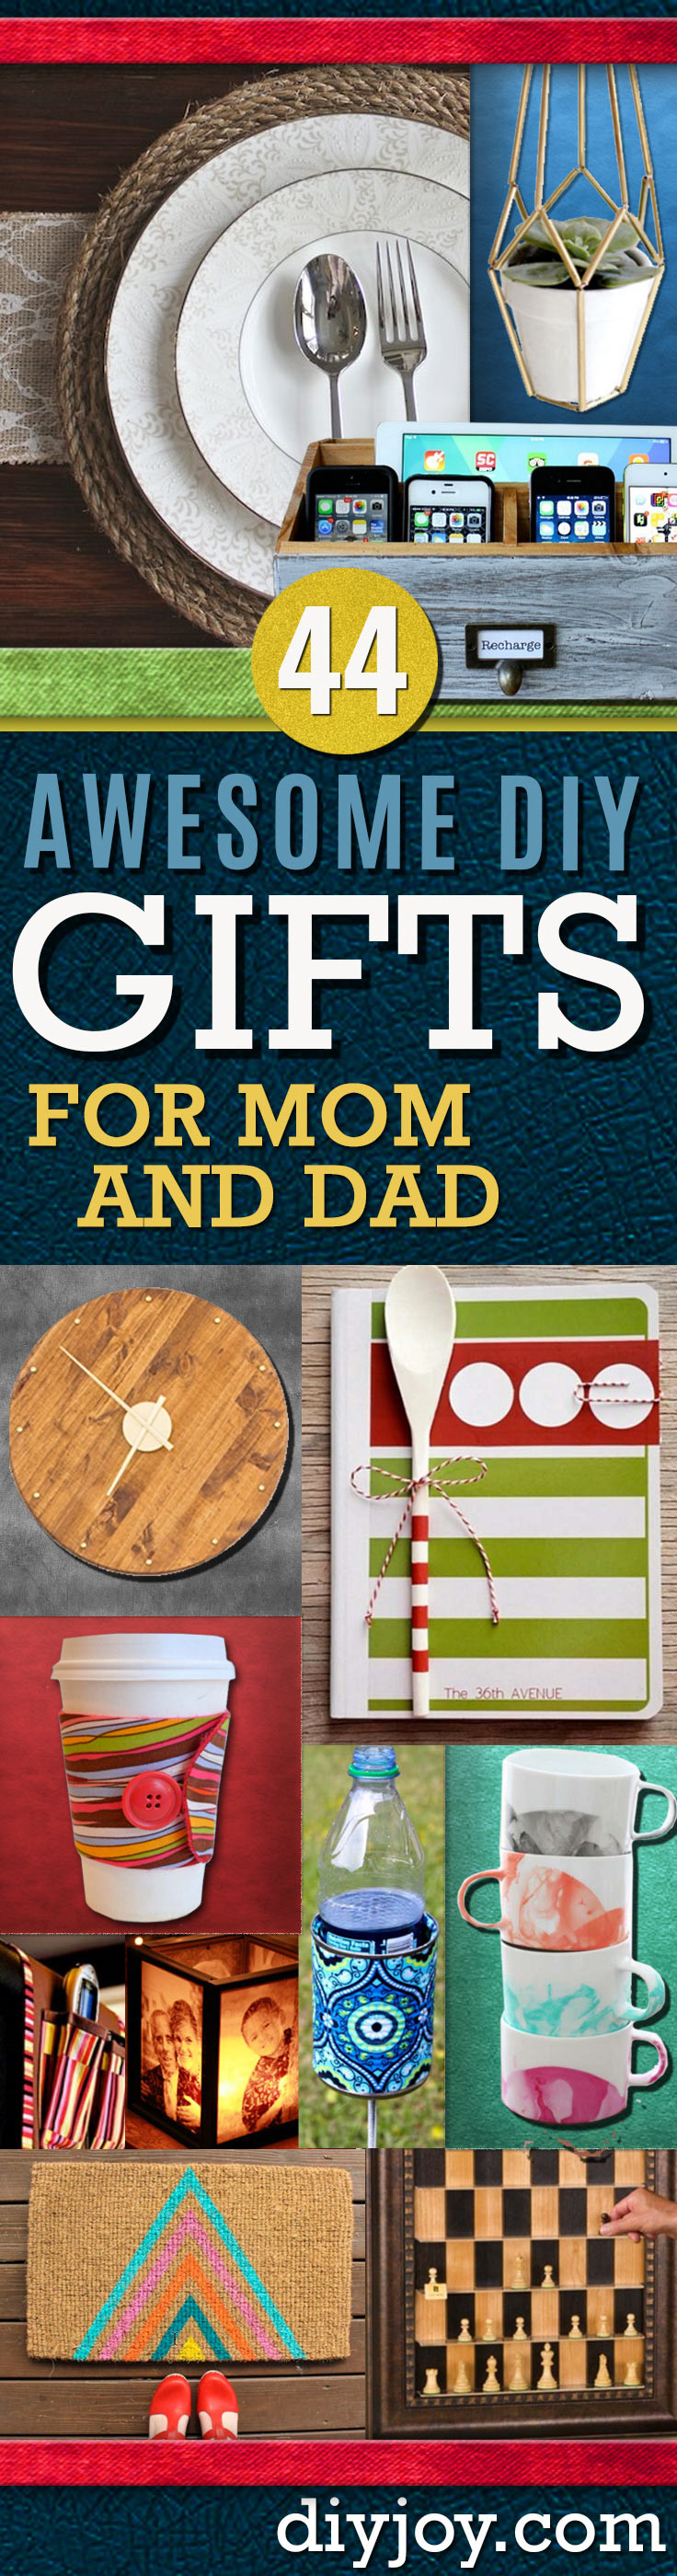 DIY Christmas Present For Dad
 Awesome DIY Gift Ideas Mom and Dad Will Love